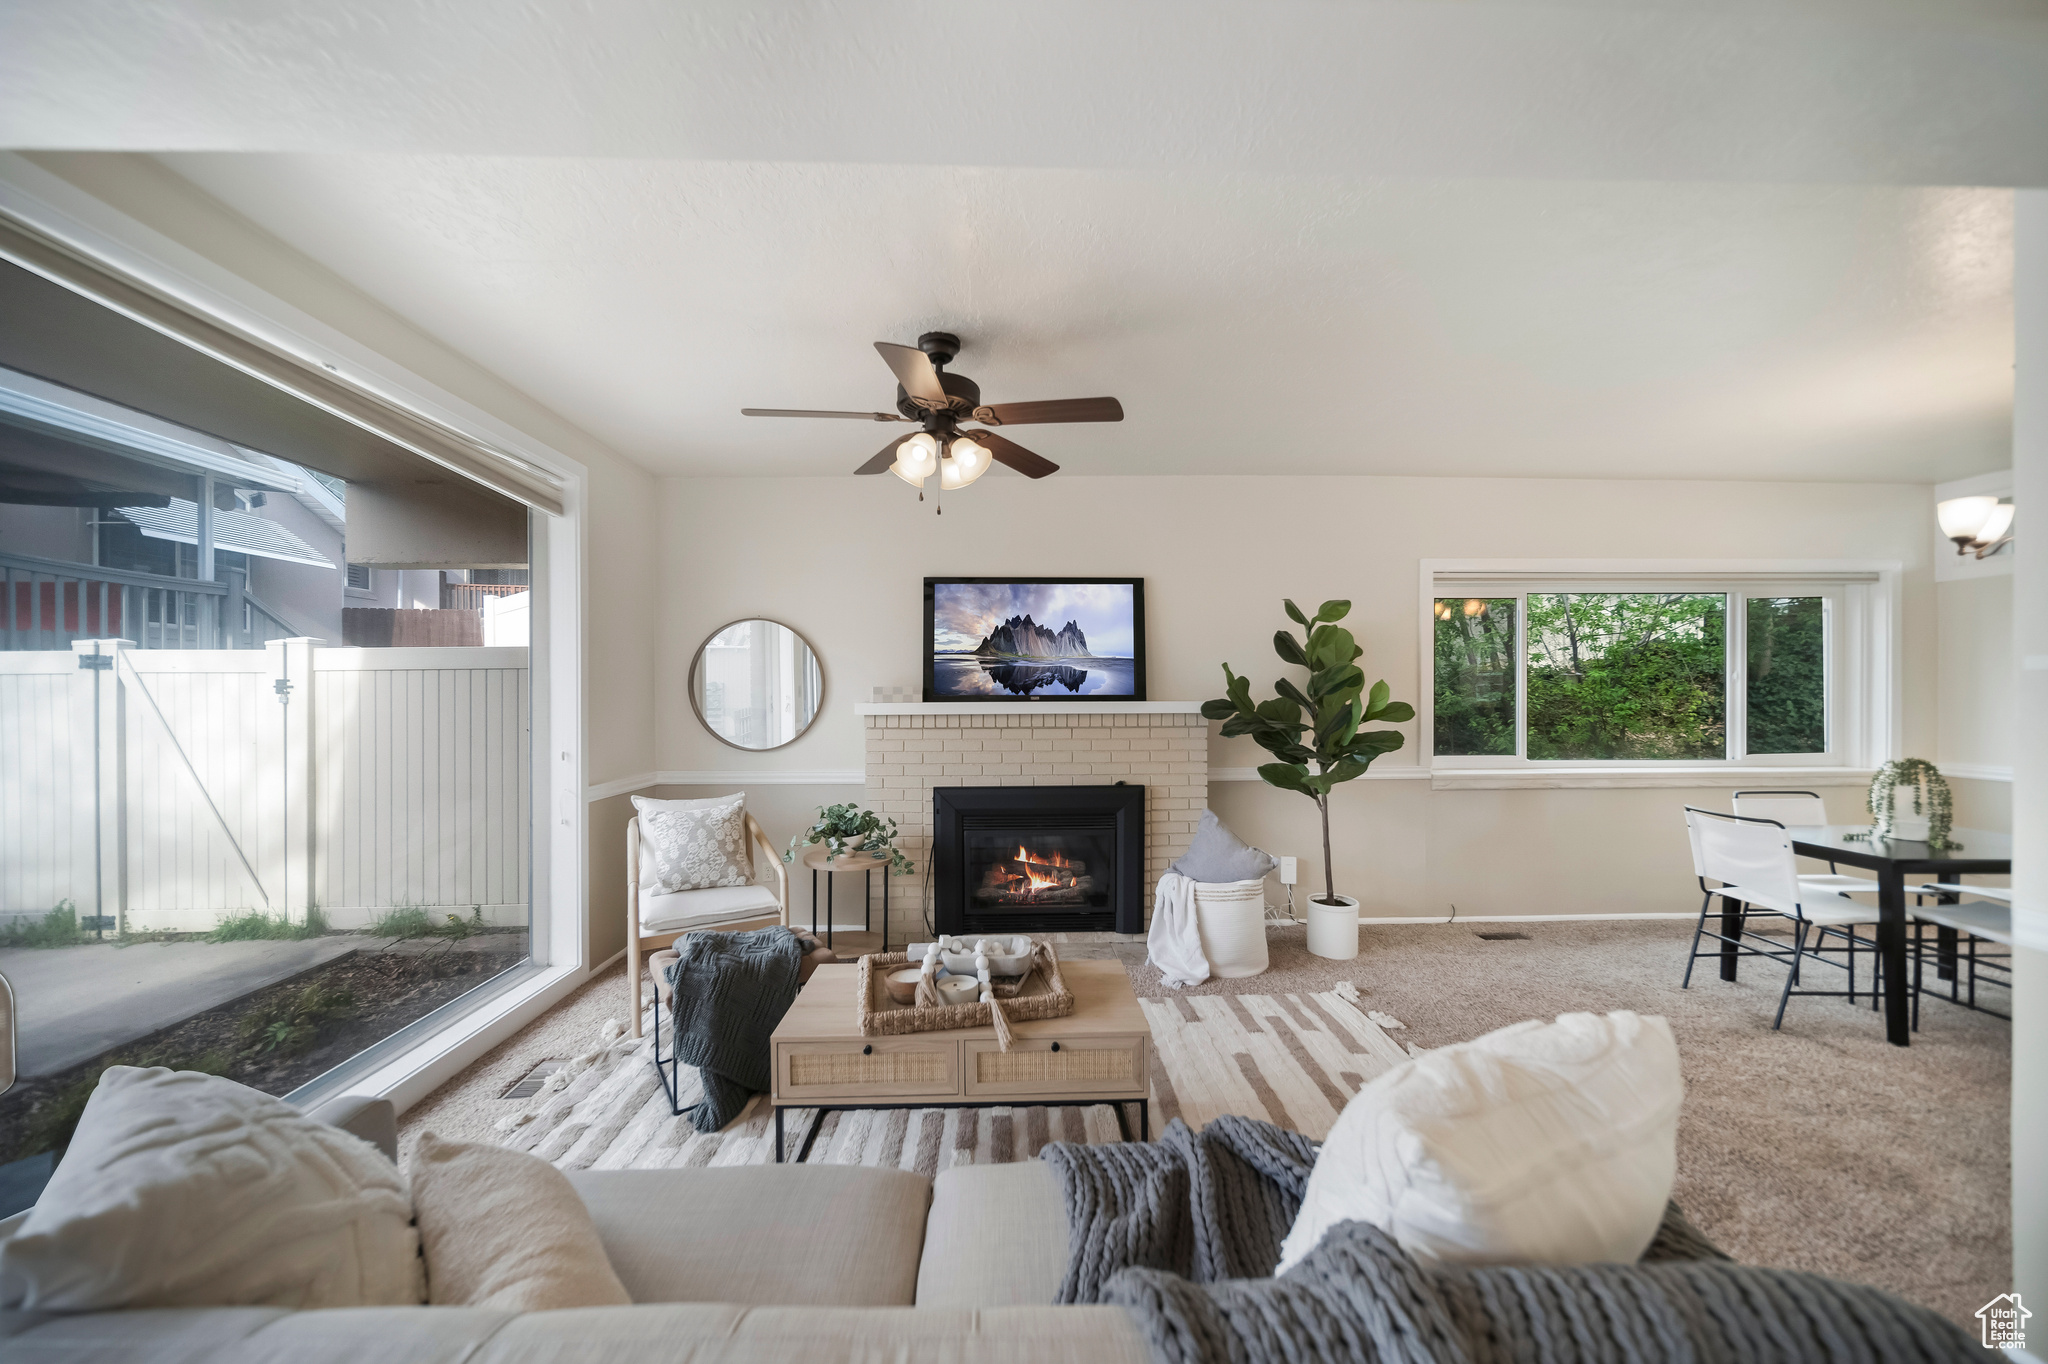 Carpeted living room featuring ceiling fan and a brick fireplace